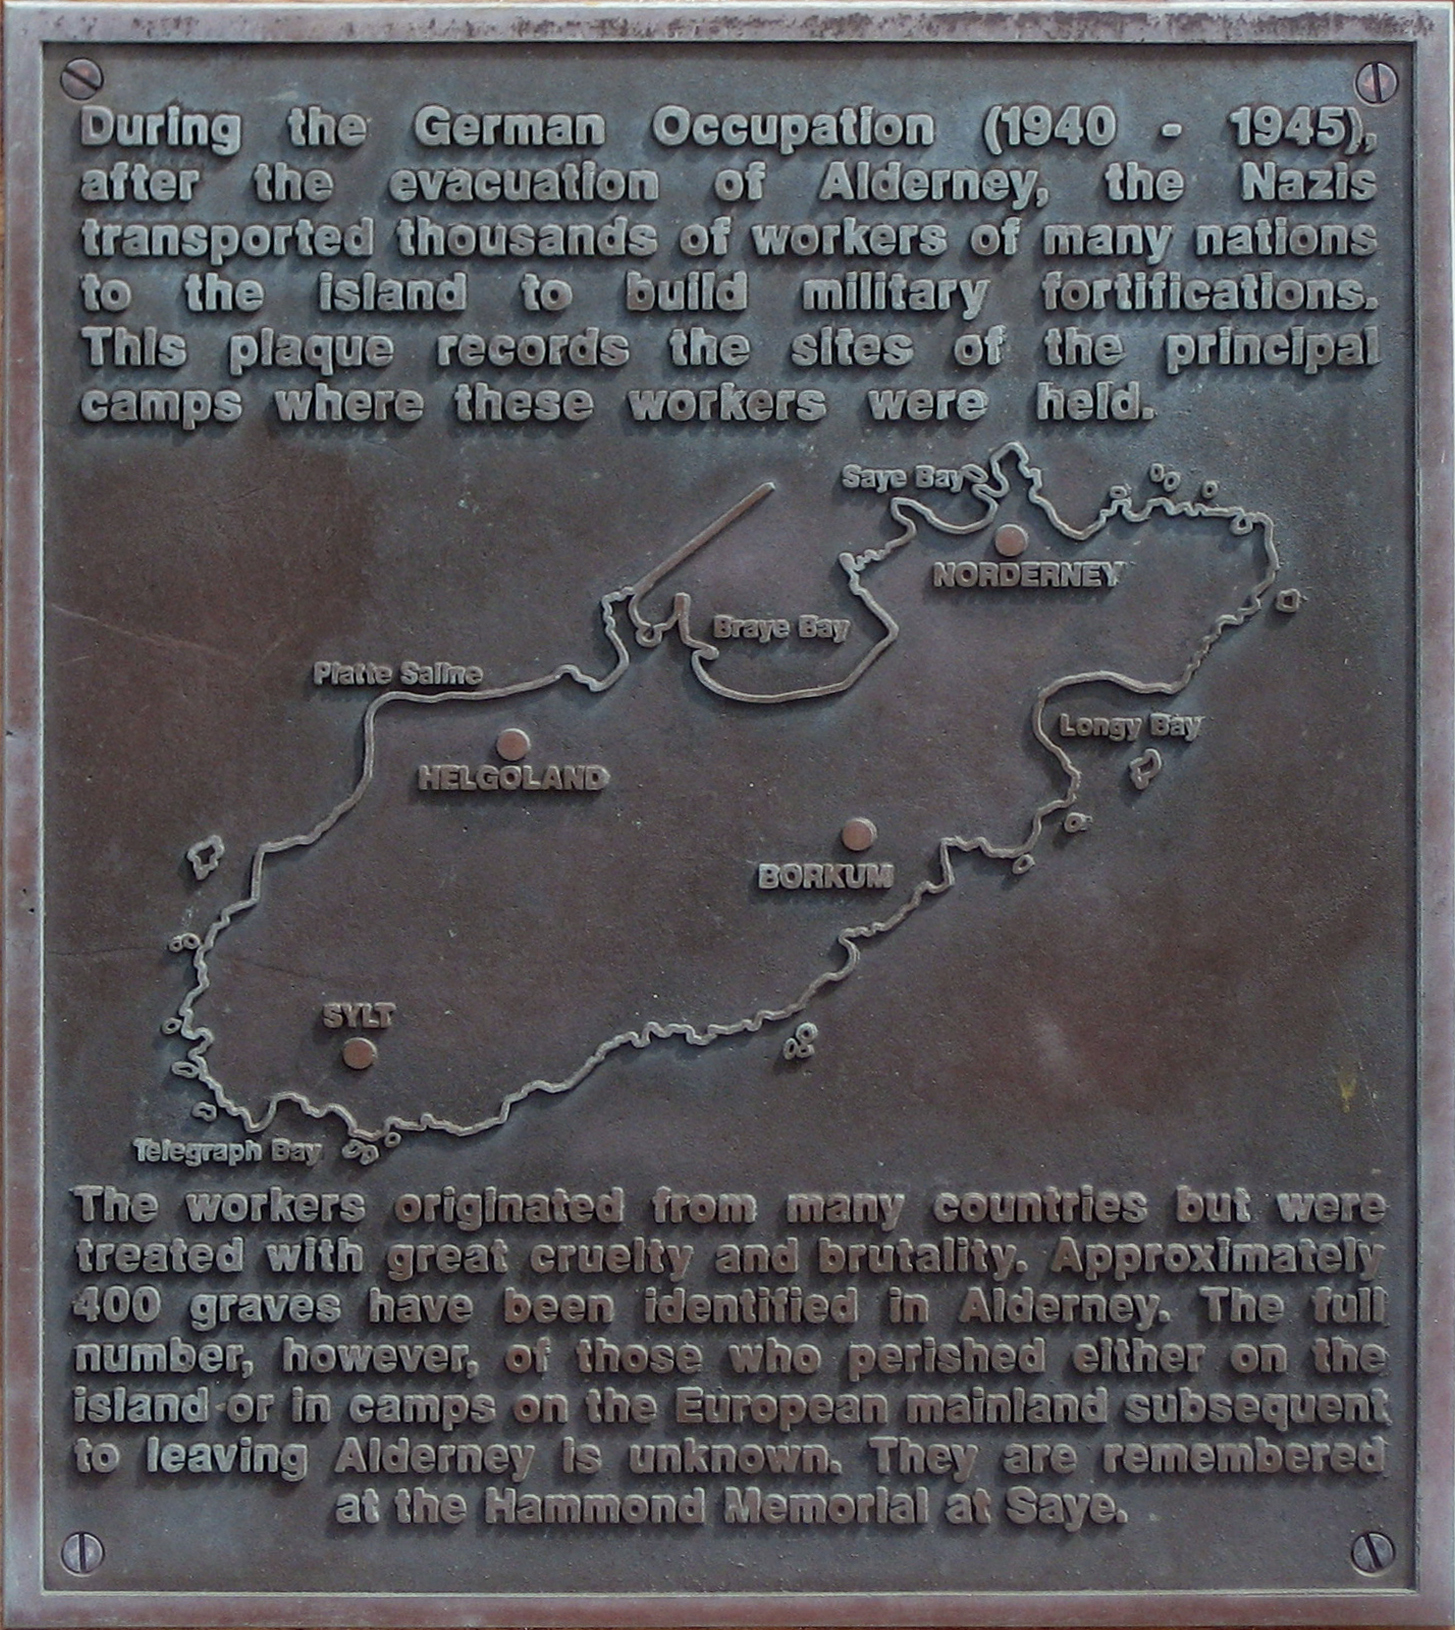 During the German Occupation (1940-1945), after the evacuation of Alderney, the Nazis transported thousands of workers from many nations to the island of Alderney to build military fortifications. This plaque records the sites of the principal camps where these workers were held. Credit: Andree Stephan via Wikimedia Commons.